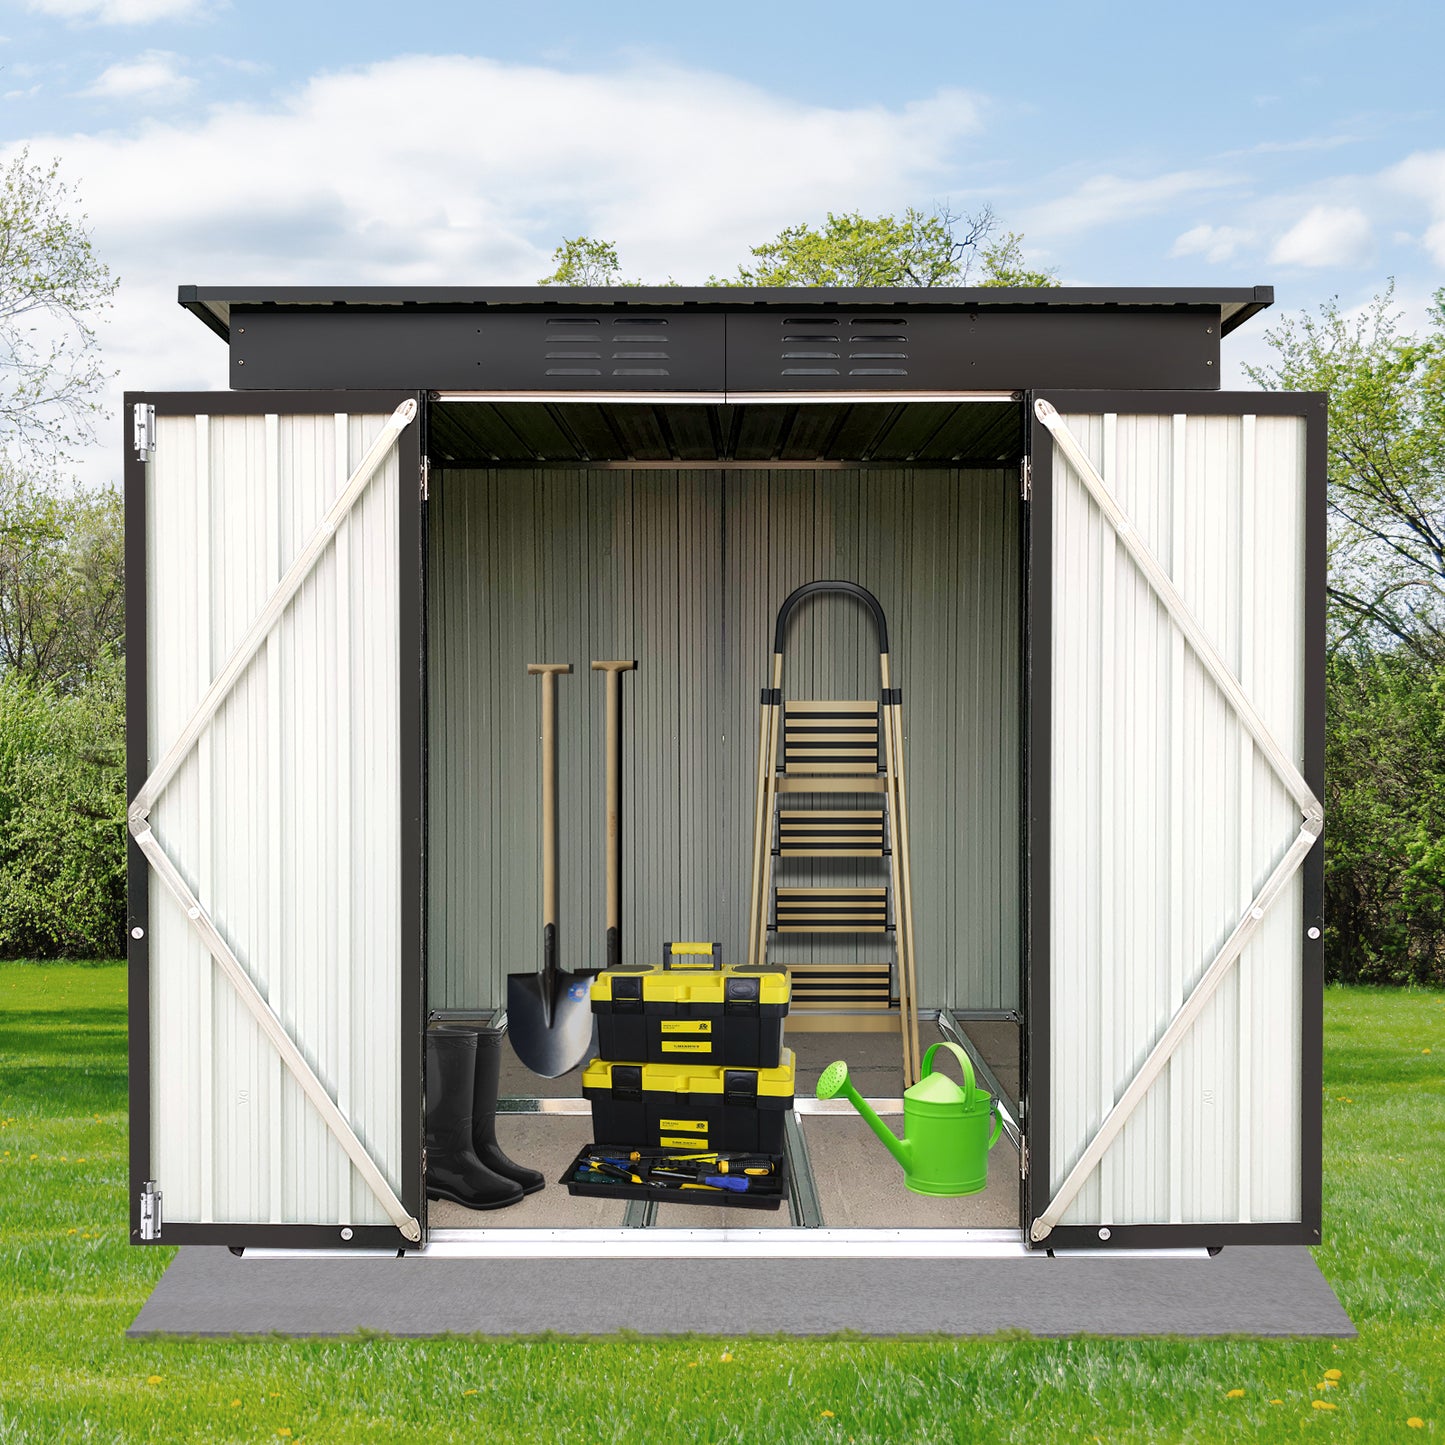 SYNGAR 6' x 4' Outdoor Metal Storage Shed, Tools Storage Shed, Galvanized Steel Garden Shed with Lockable Doors, Outdoor Storage Shed for Backyard, Patio, Lawn, D7806